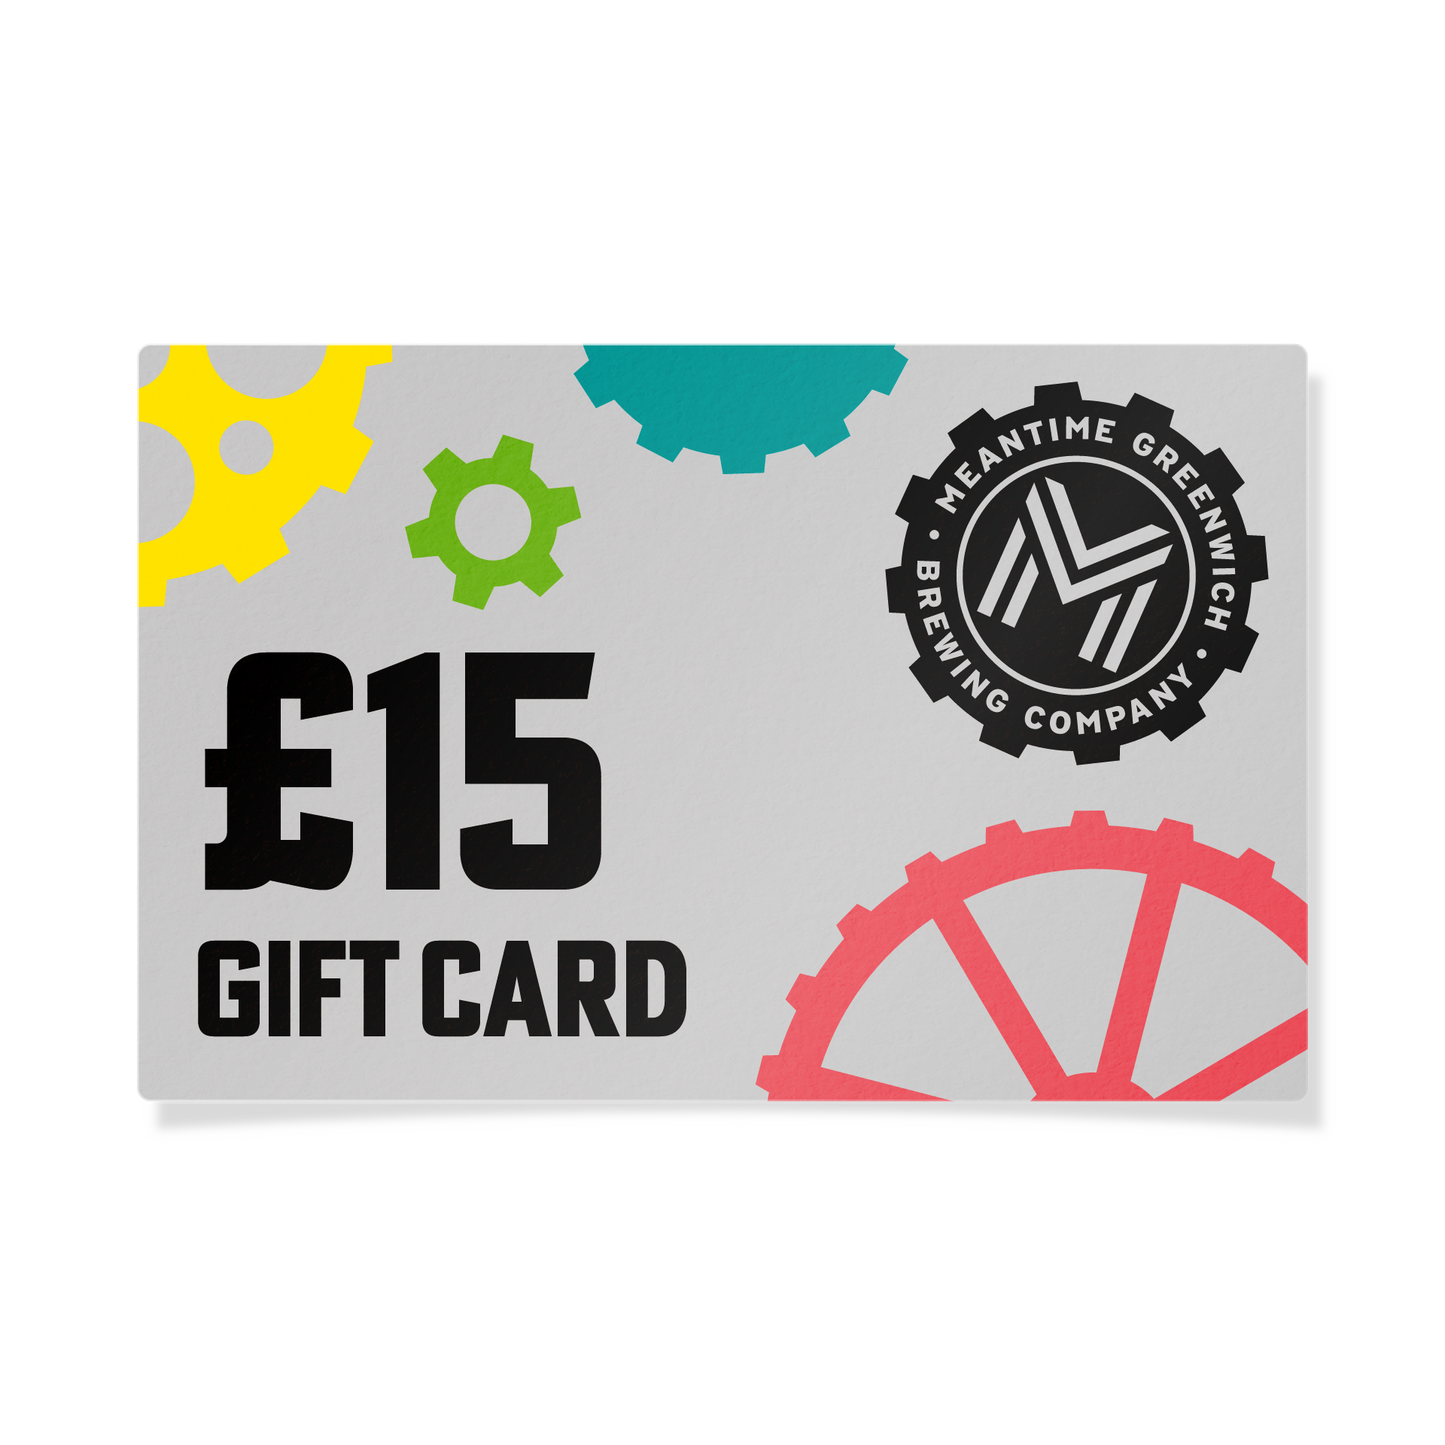 Meantime Online Shop Gift Card